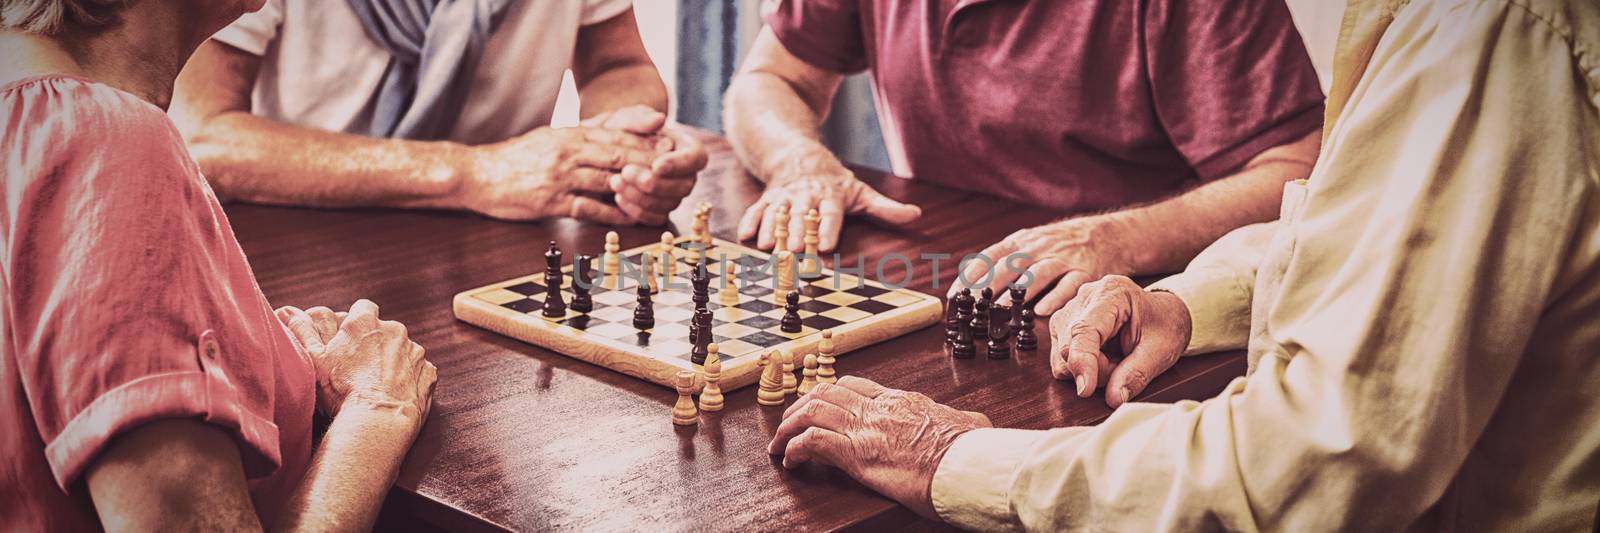 Seniors playing chess in a retirement home